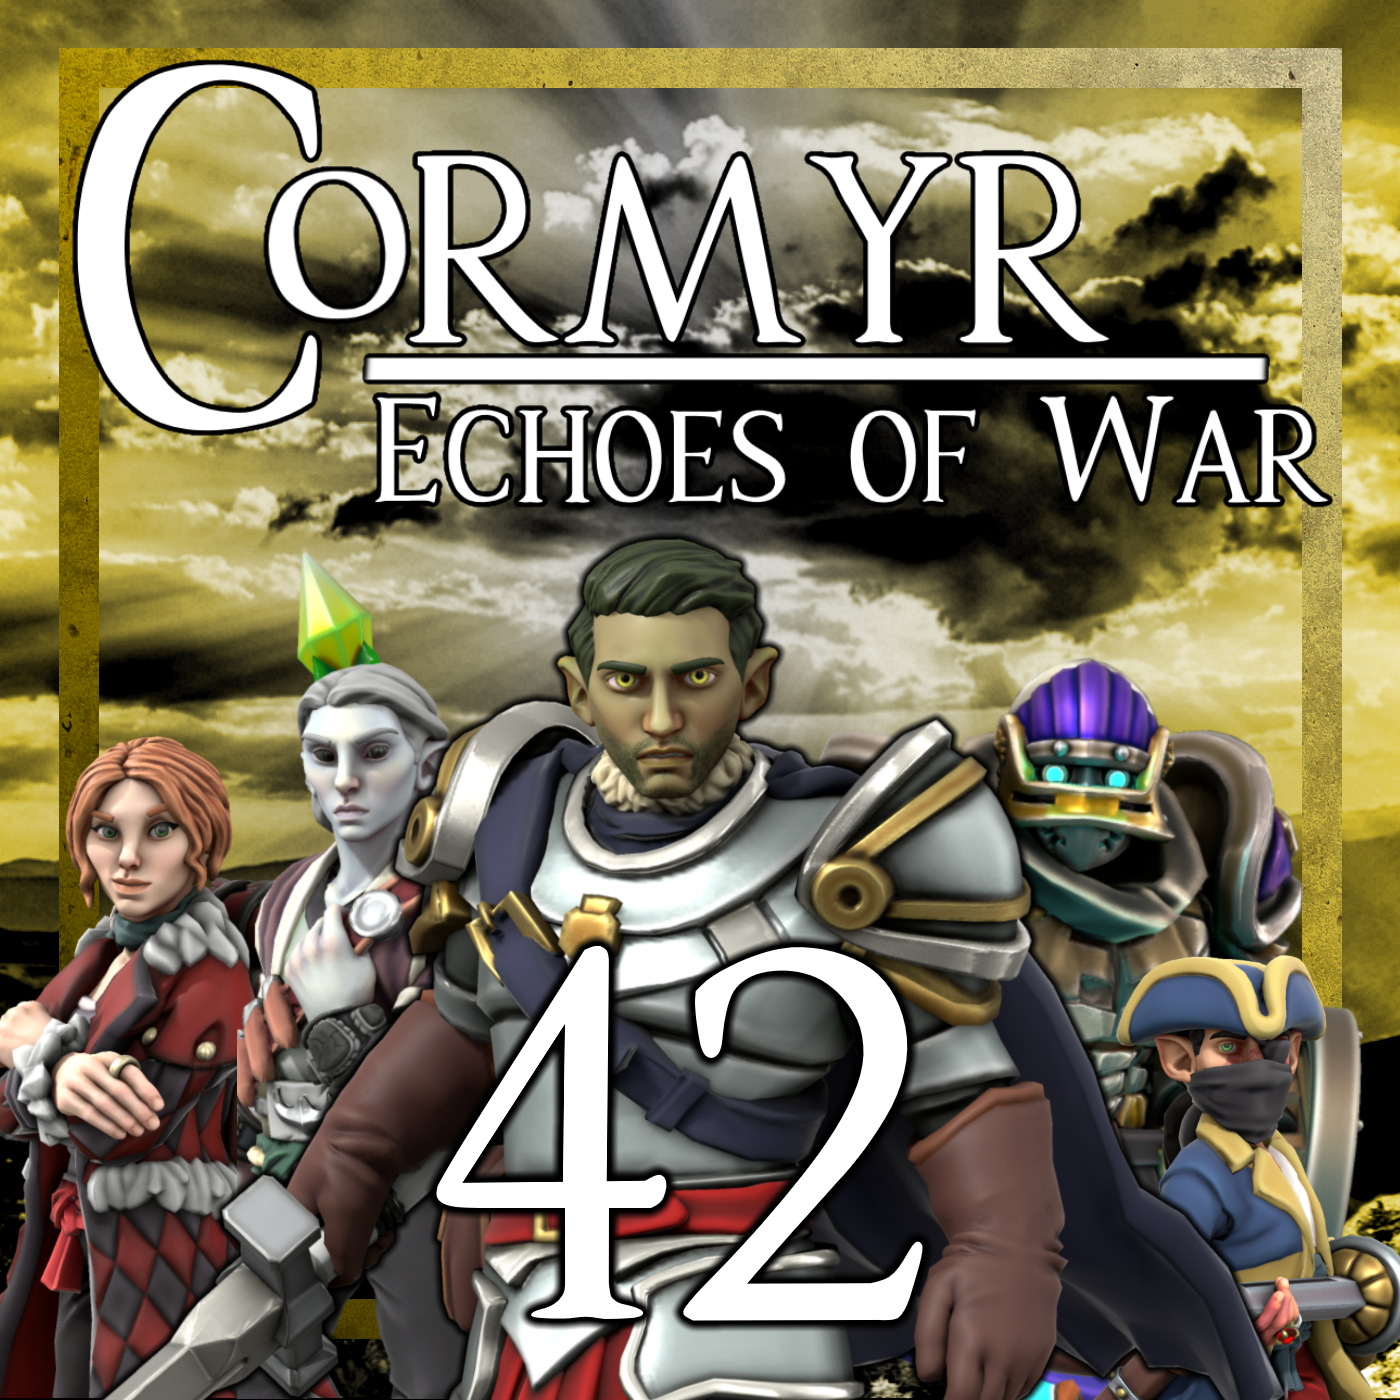 Cormyr: Echoes of War - Ep. 42 - The Gauntlet